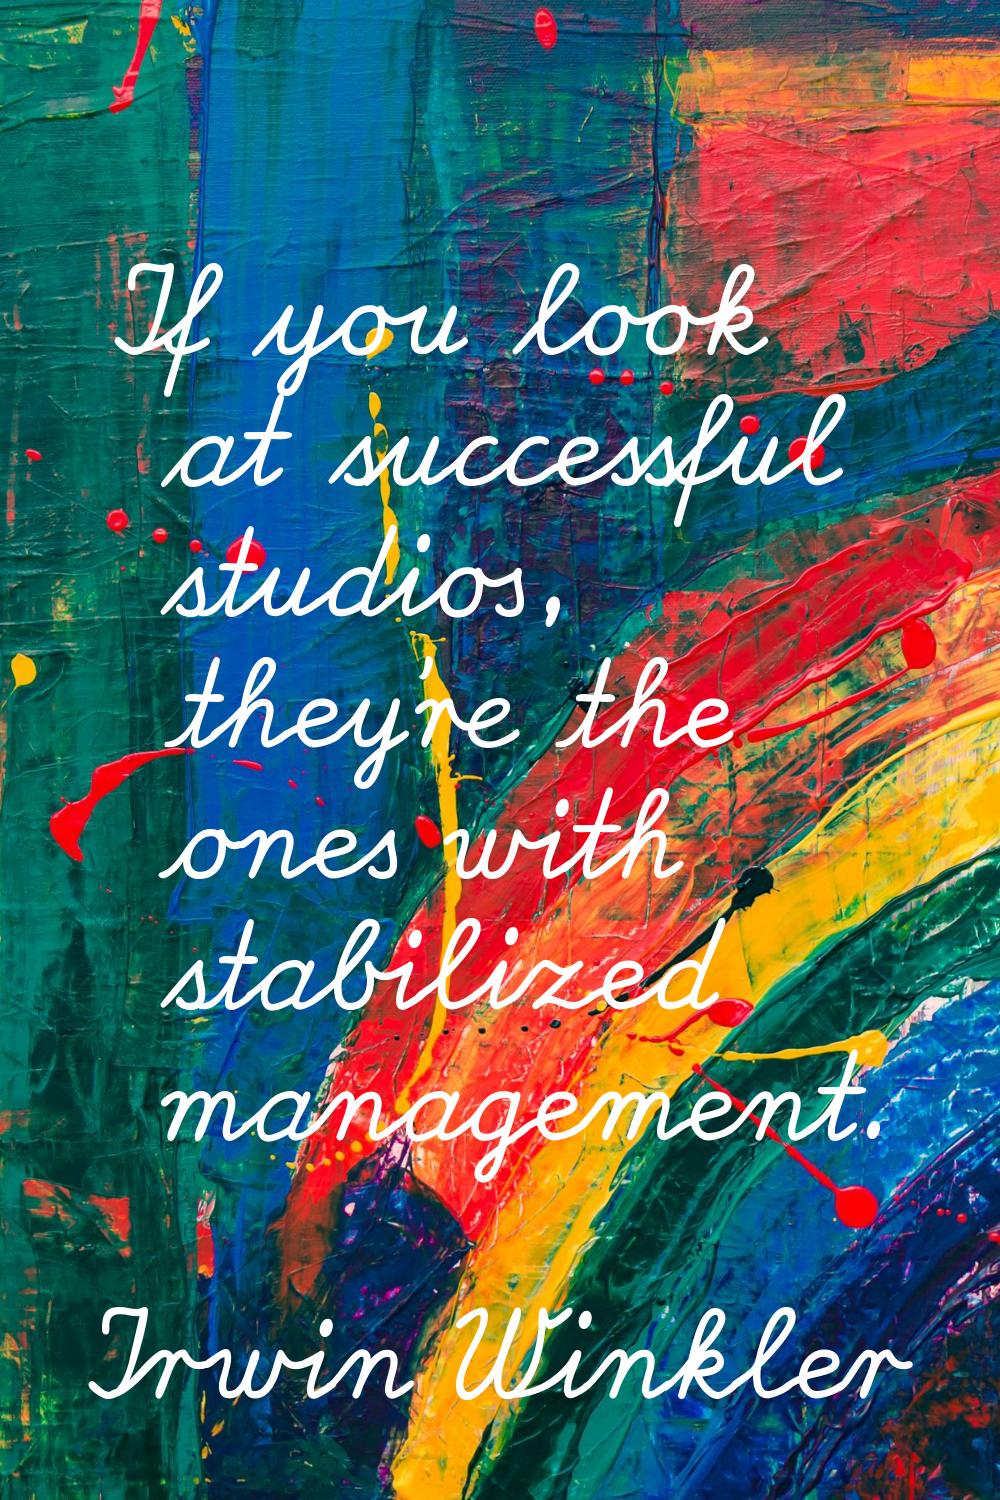 If you look at successful studios, they're the ones with stabilized management.